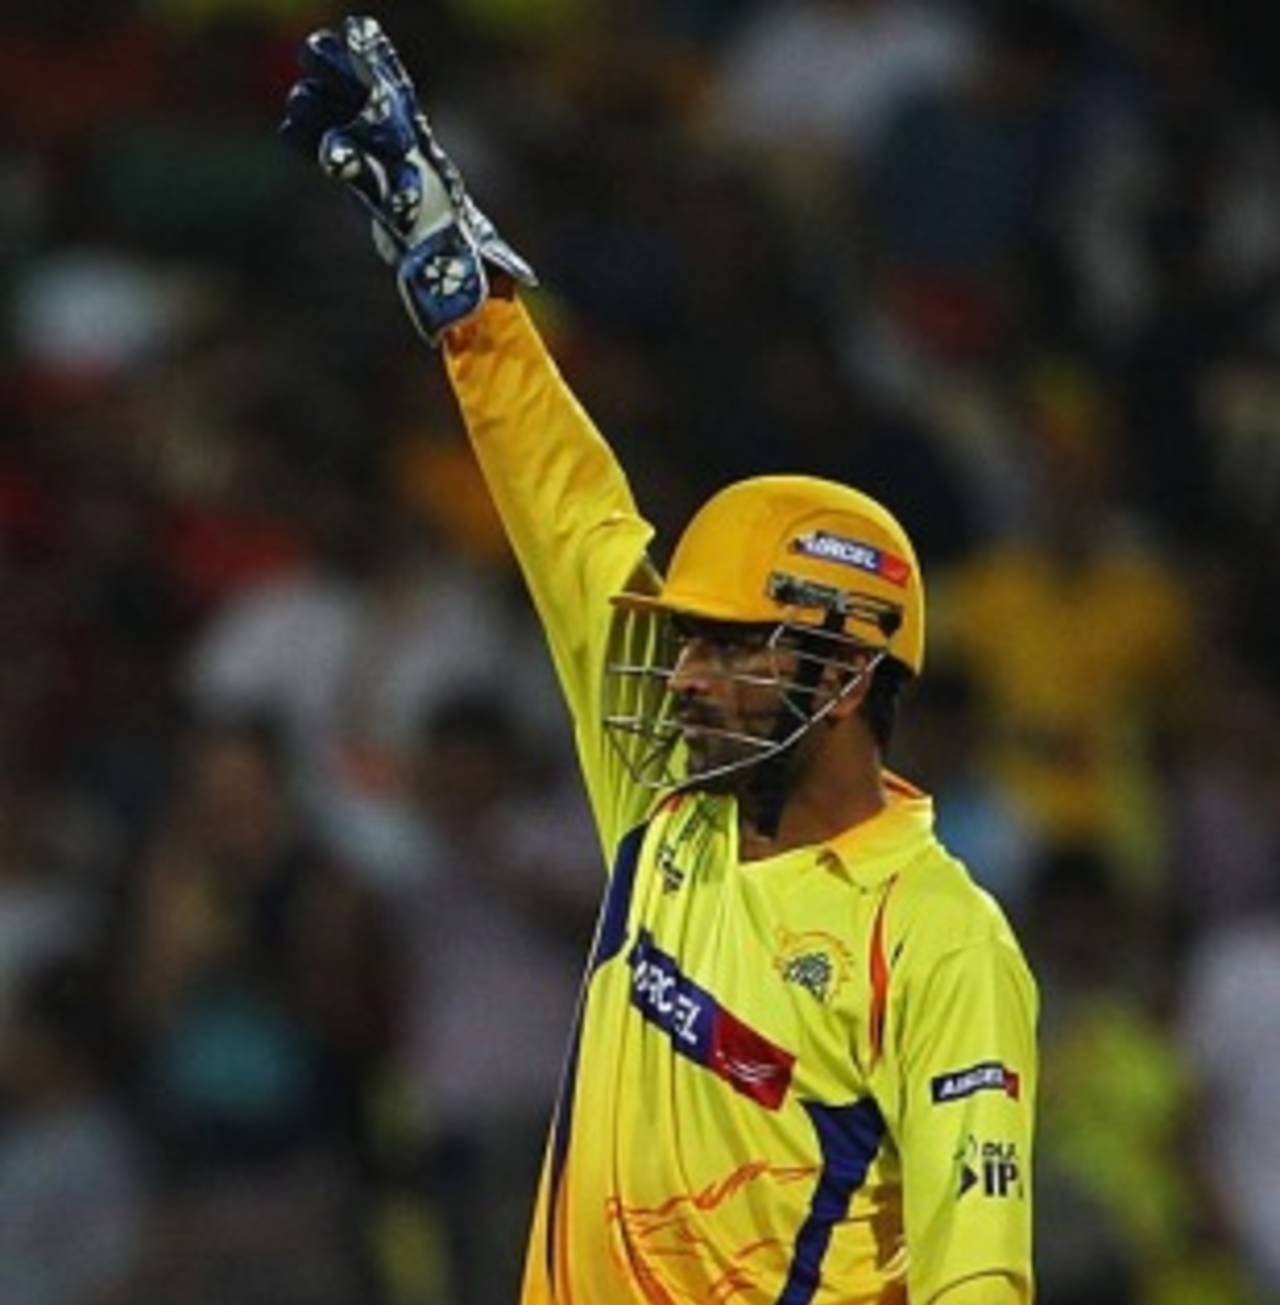 MS Dhoni signals to one of his fielders, Chennai Super Kings v Mumbai Indians, IPL, April 6, 2010